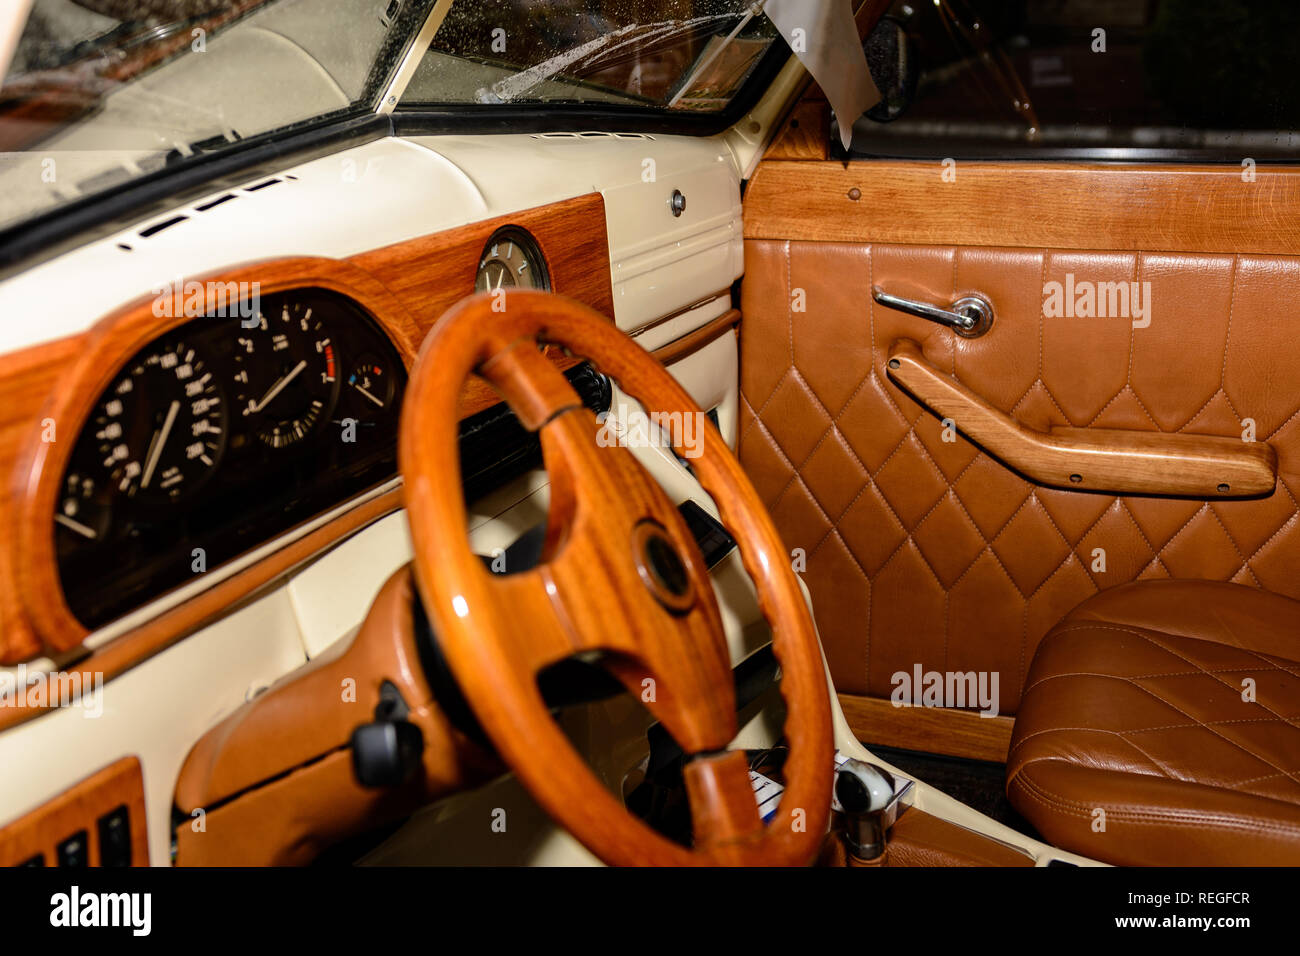 Interior Of The Car Is A Brown Color And Leather 2019 Stock